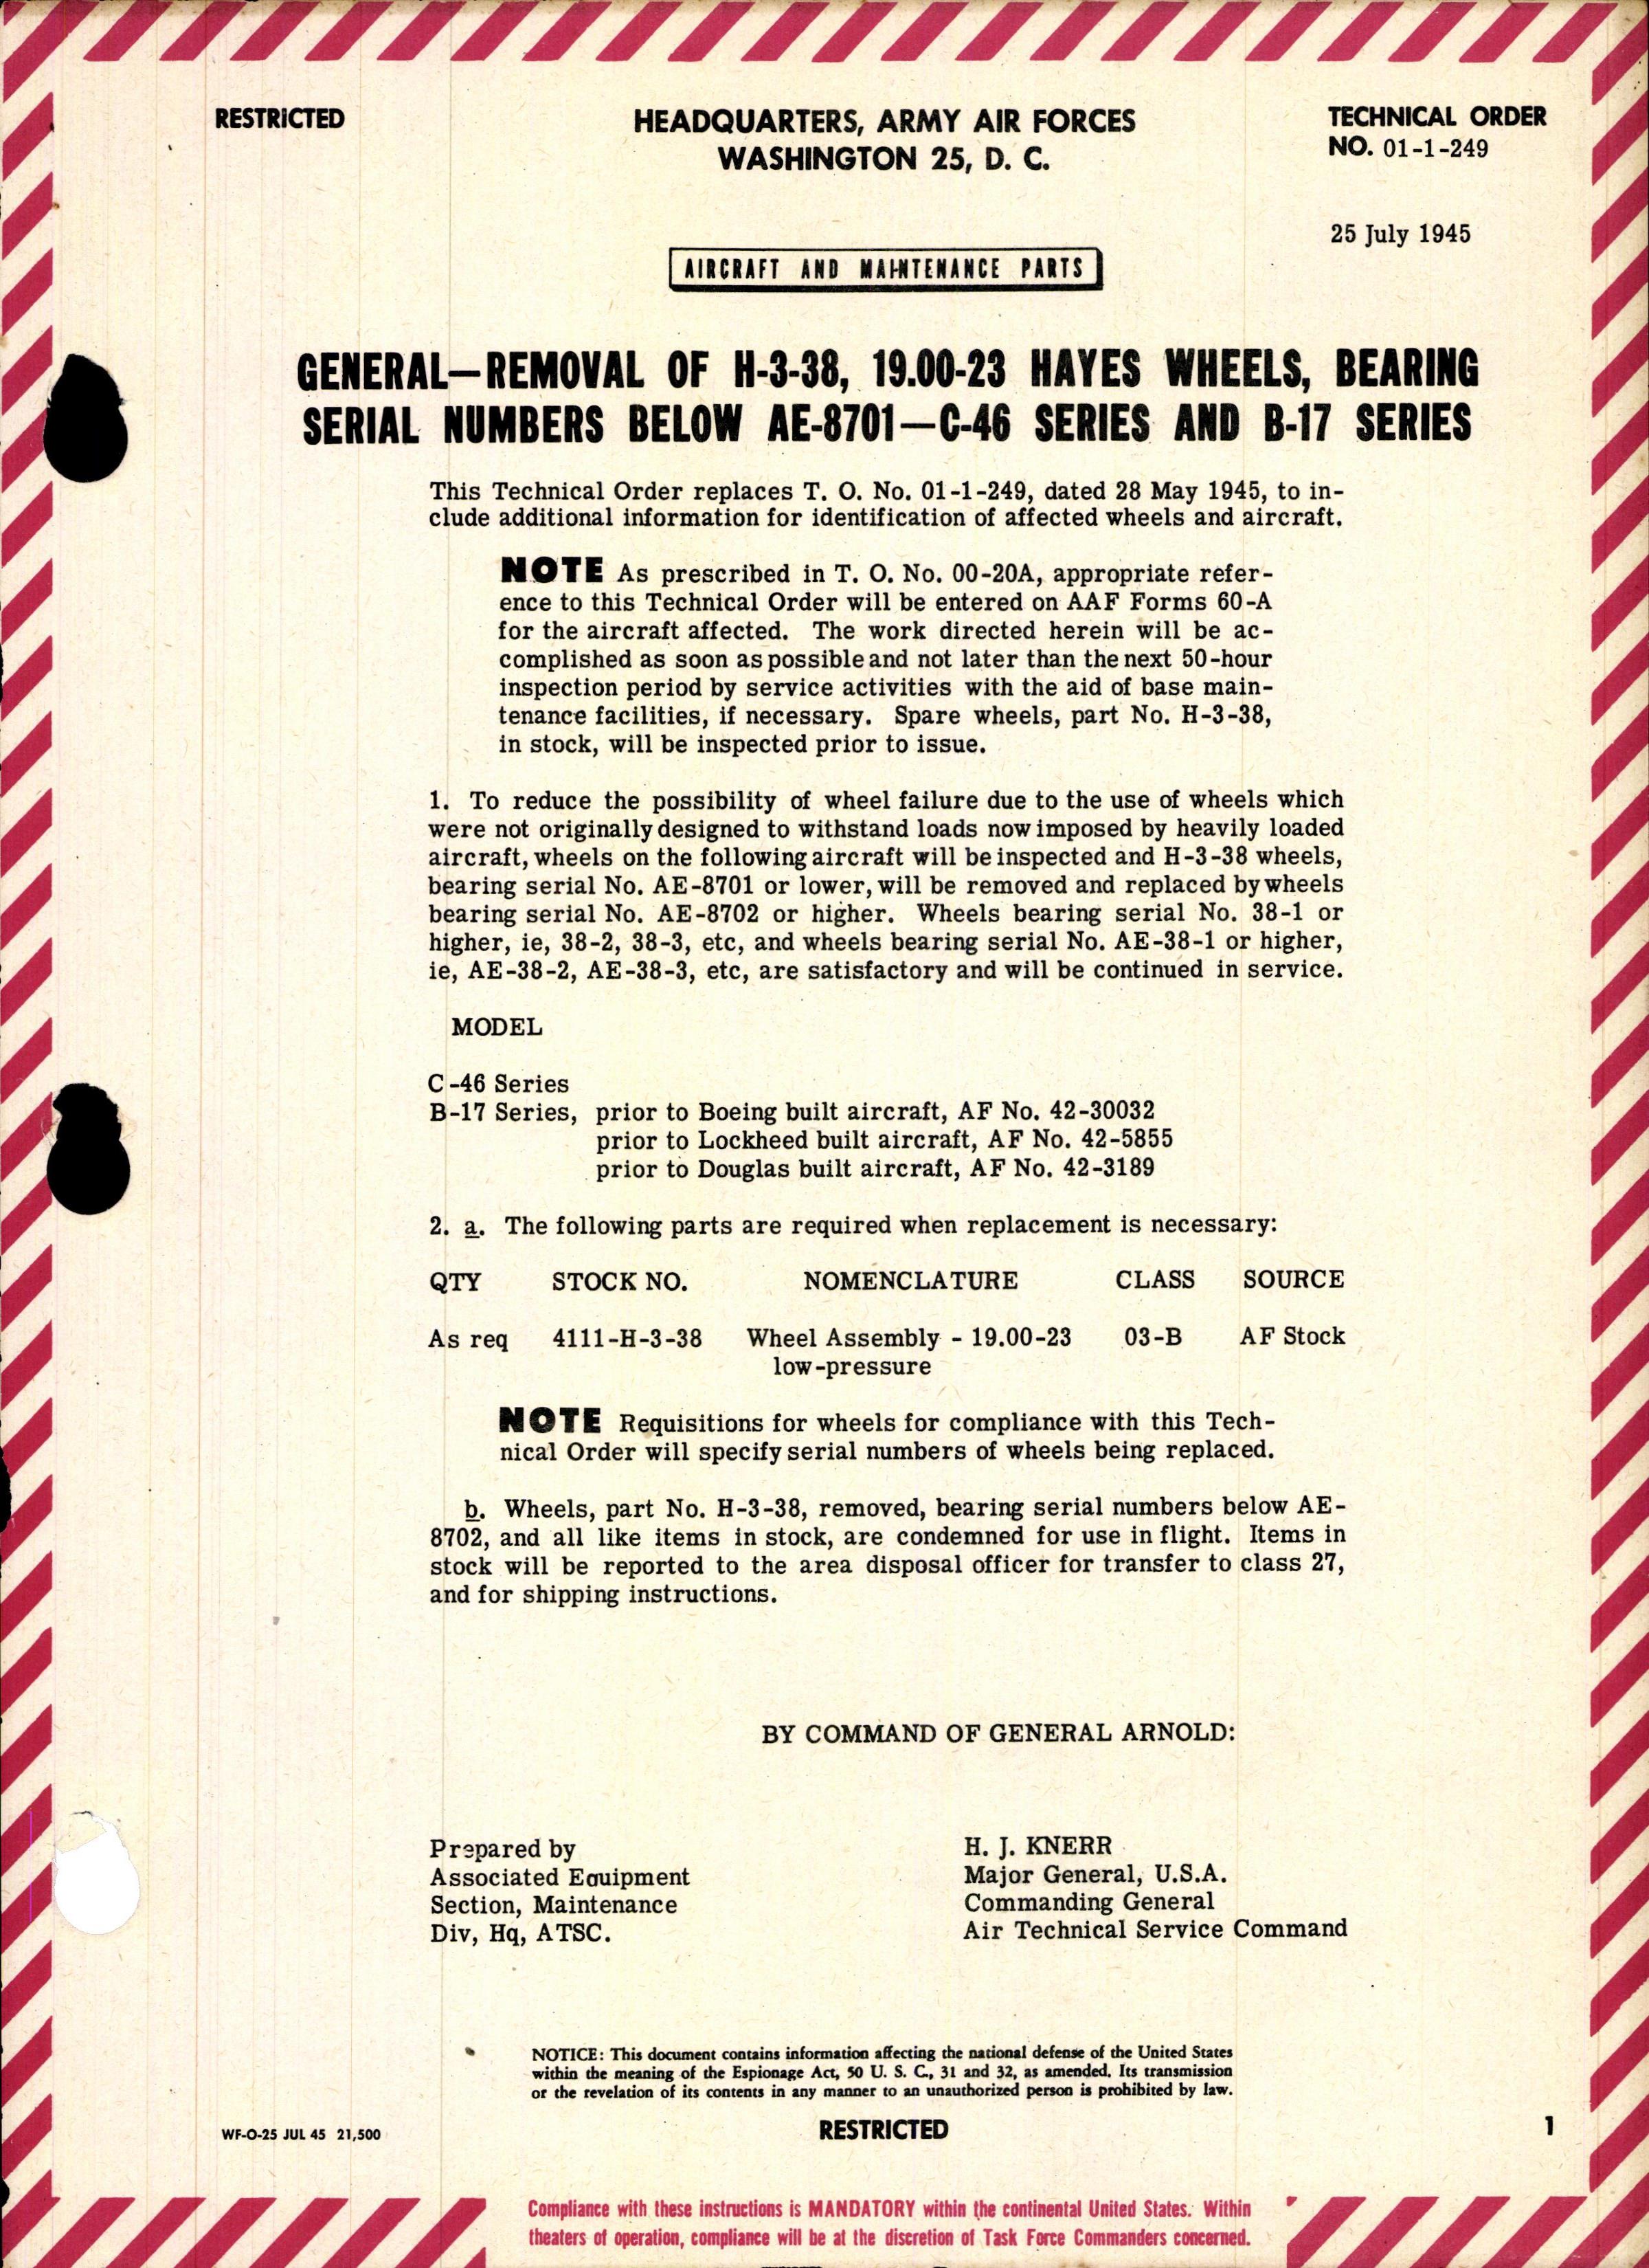 Sample page 1 from AirCorps Library document: Removal of H-3-38, 19.00-23 Wheels, Bearing Serial Numbers Below AE-8701